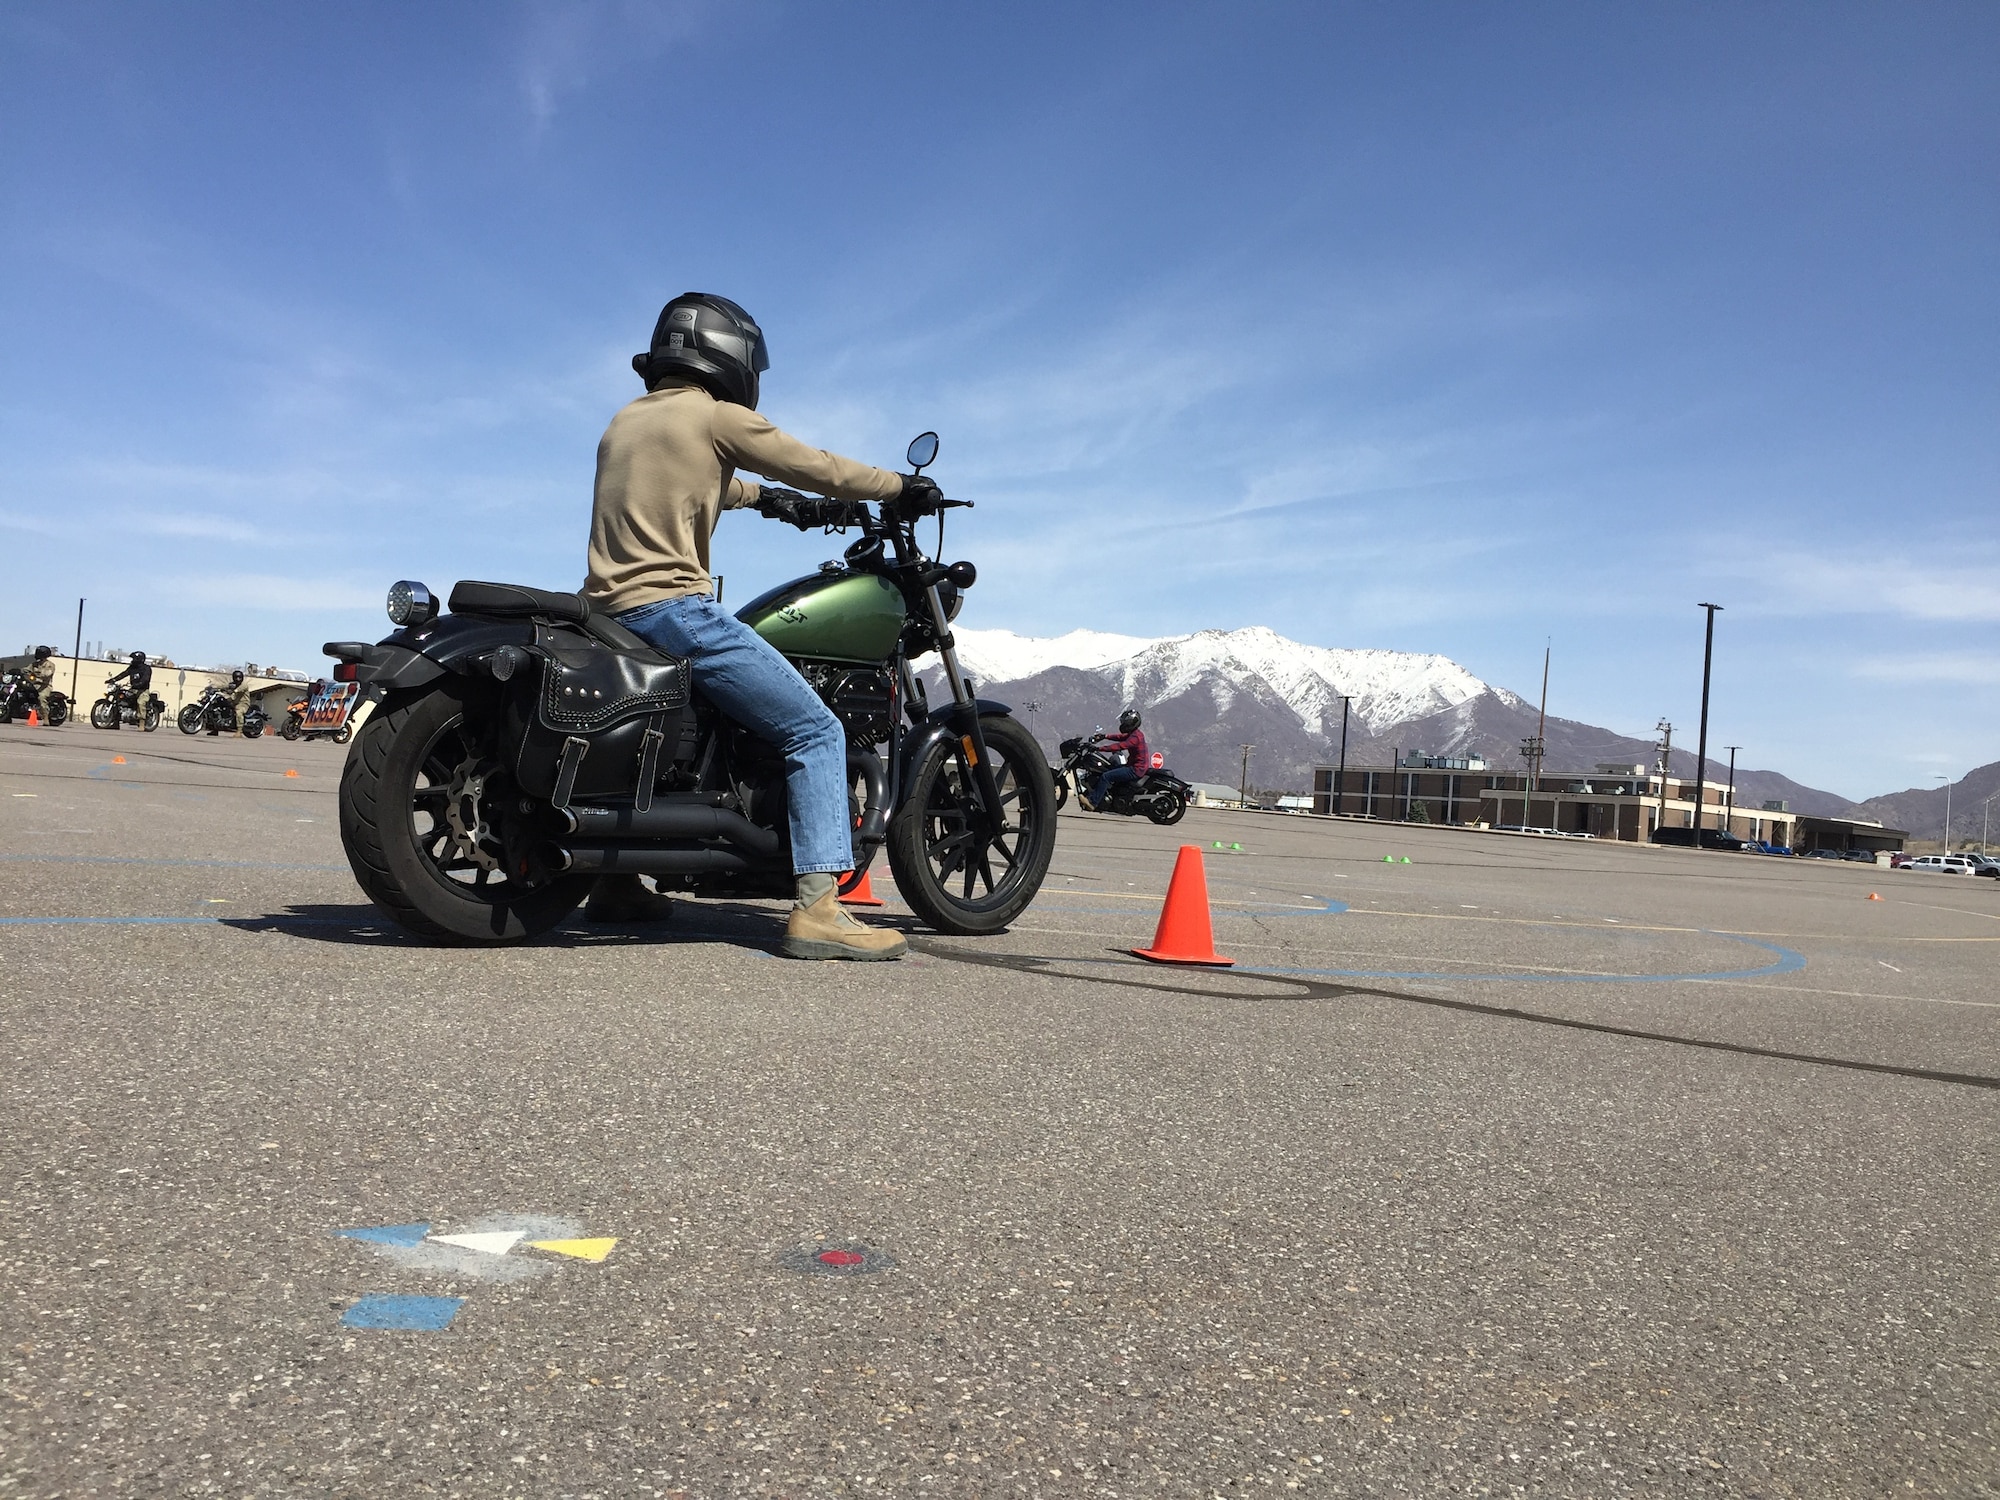 A photo of a motorcycle training course